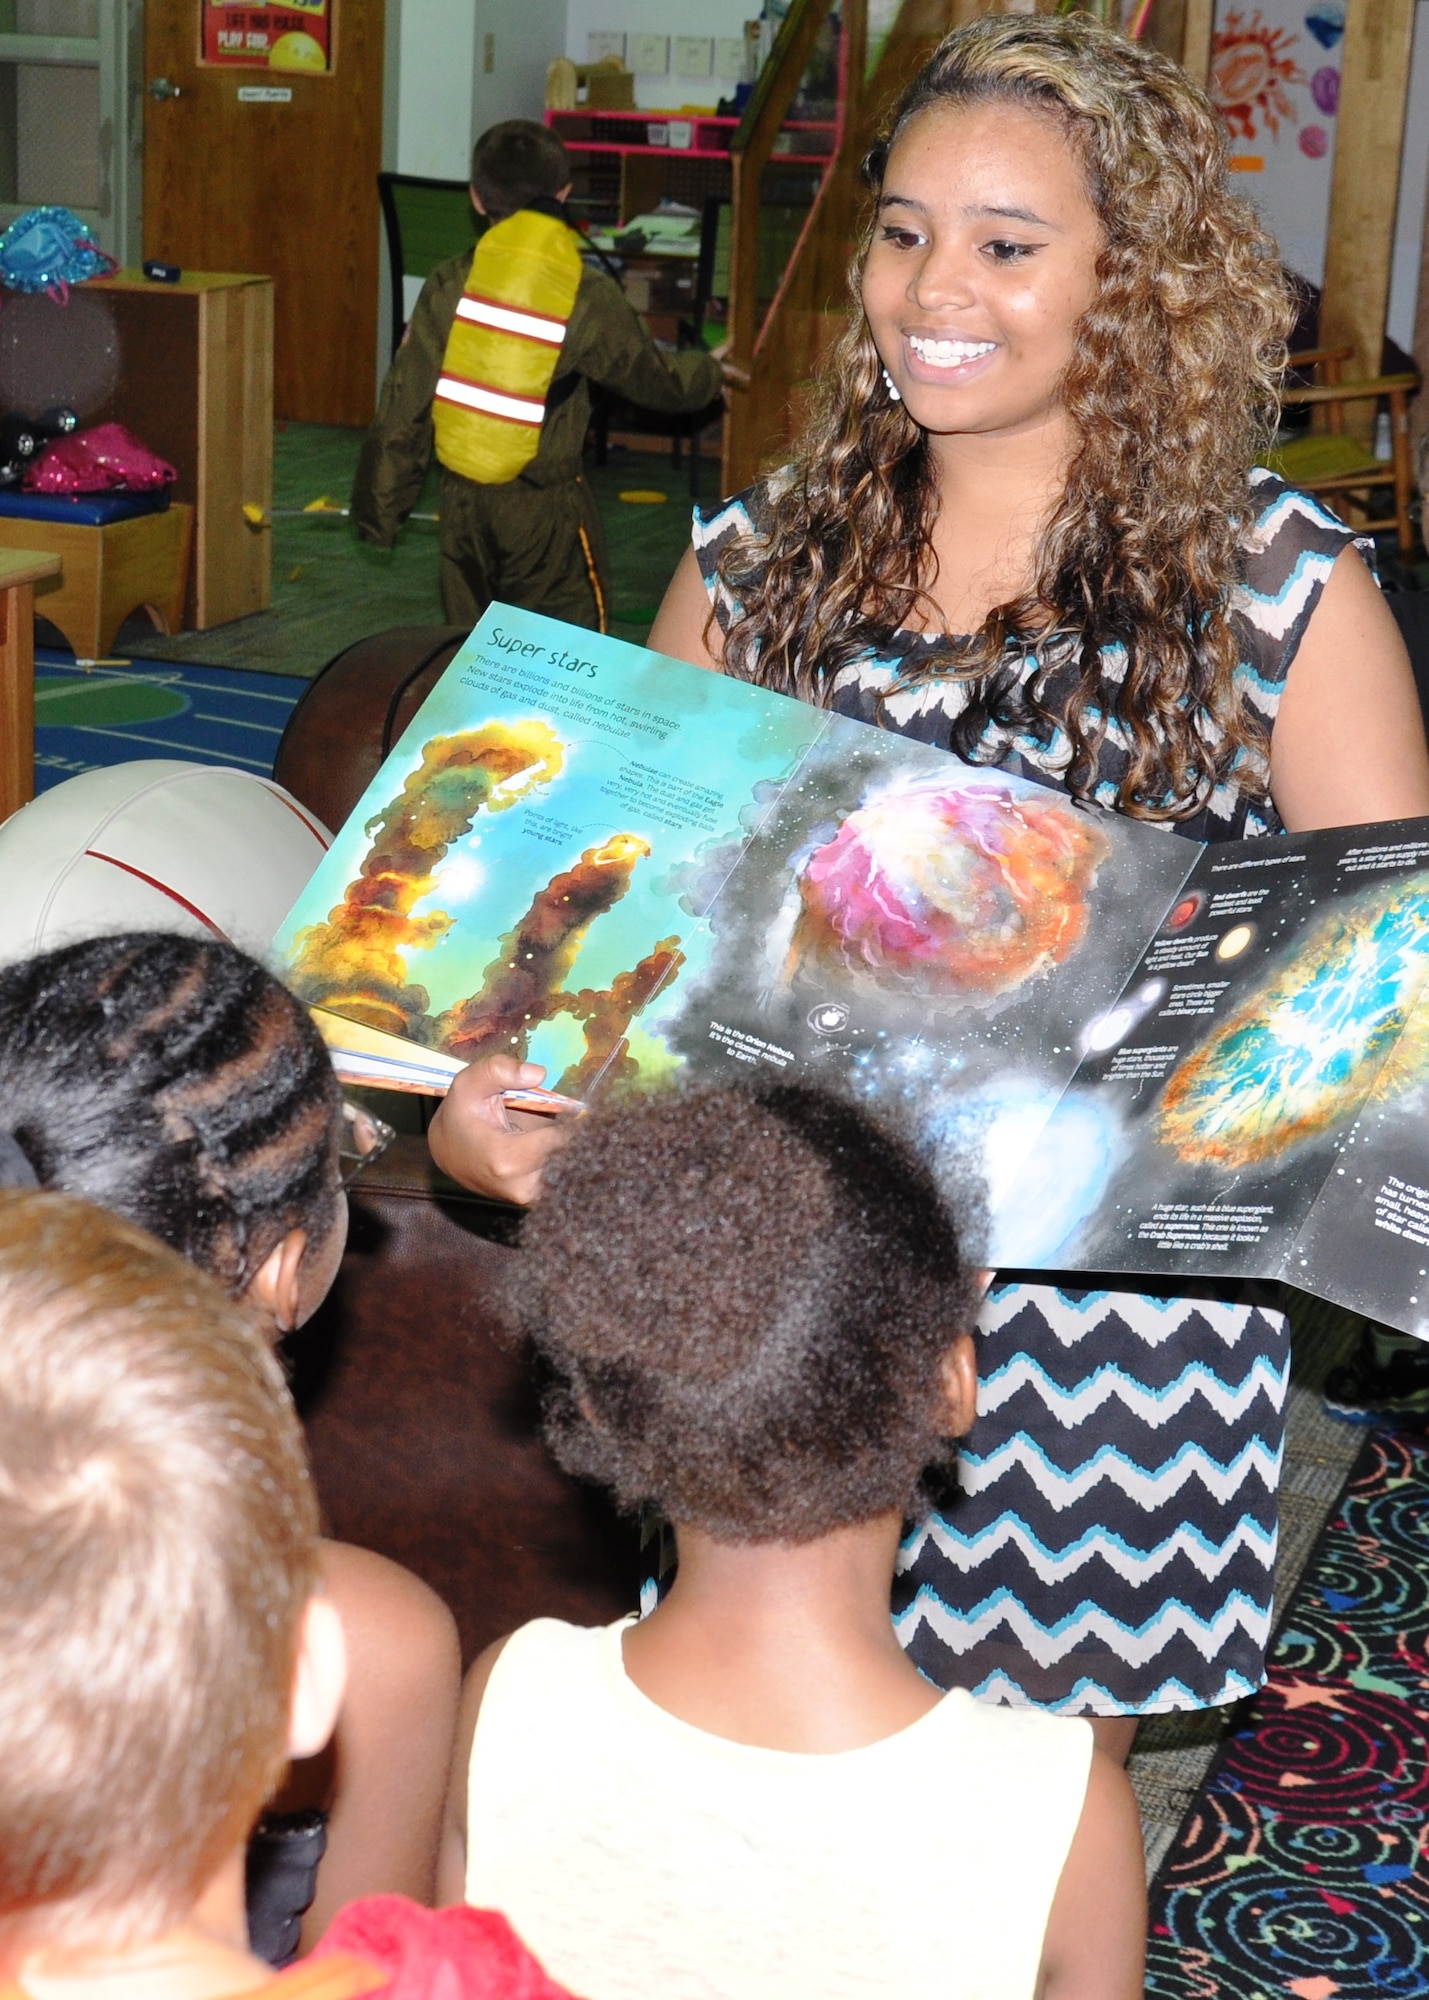 Jocelyn Nimbley, Youth Programs volunteer, reads to children attending the summer School Age Program at the Patrick Air Force Base Youth Center June 11. She was recently selected as the installation winner for the annual Boys and Girls Club of America national competition Military Youth of The Year. As a result, she will attend a week-long Air Force Services sponsored Youth of the Year camp in July. (U.S. Air Force photo/Chrissy Cuttita)